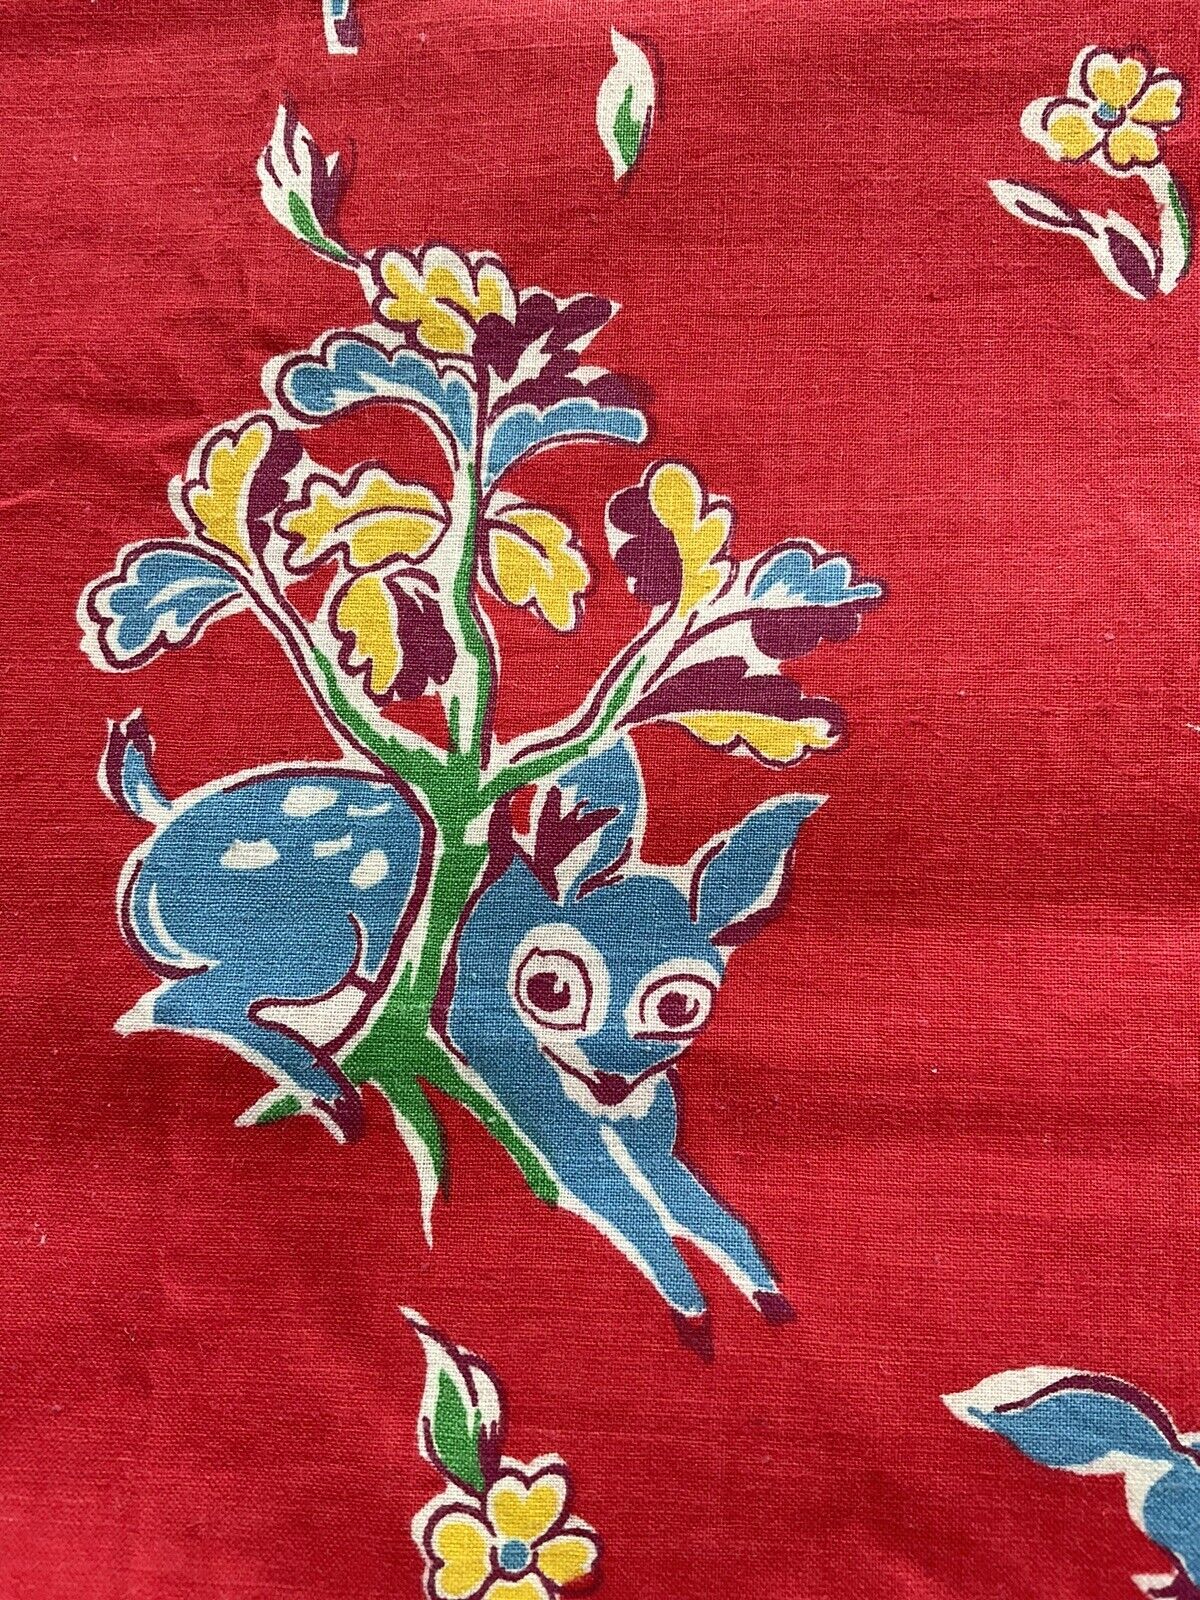 Vintage Novelty Juvenile red fabric blue baby deer in trees and Flowers